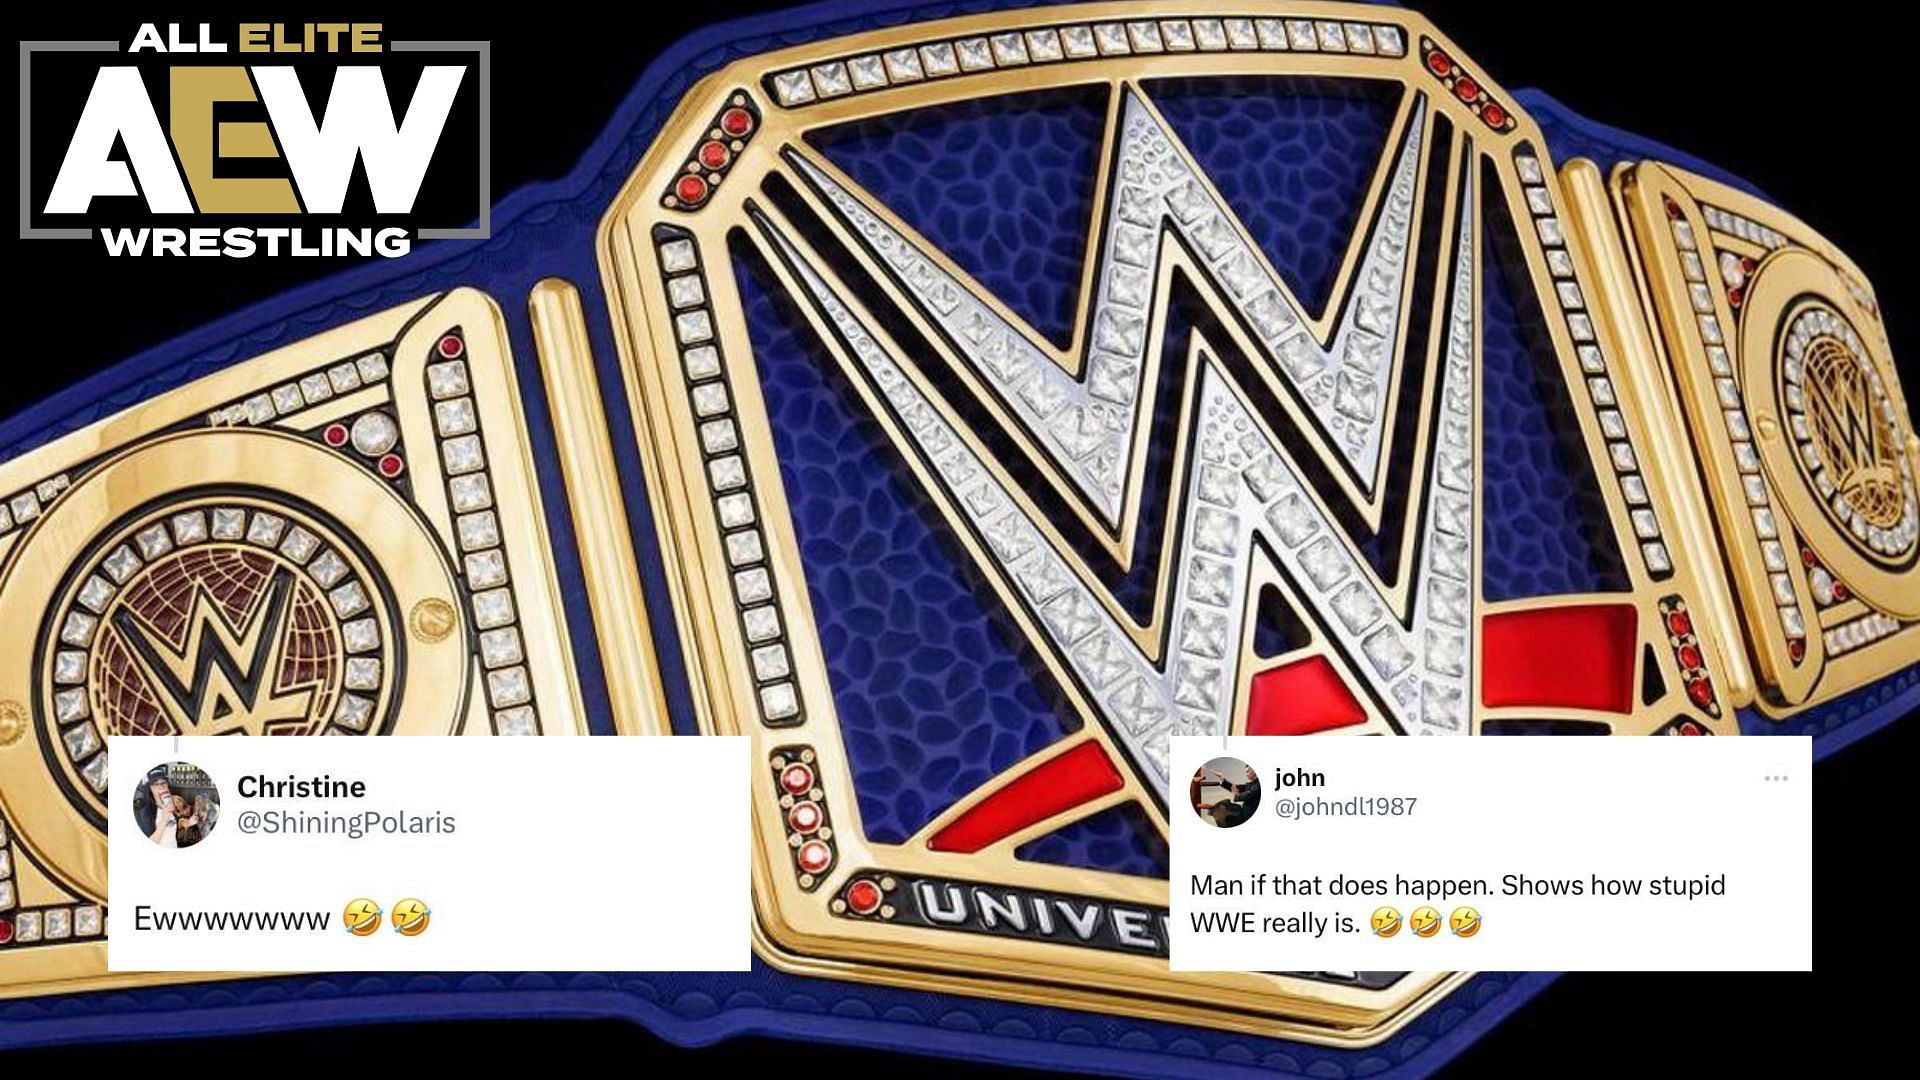 Which former Universal Champion has fans split on Twitter?